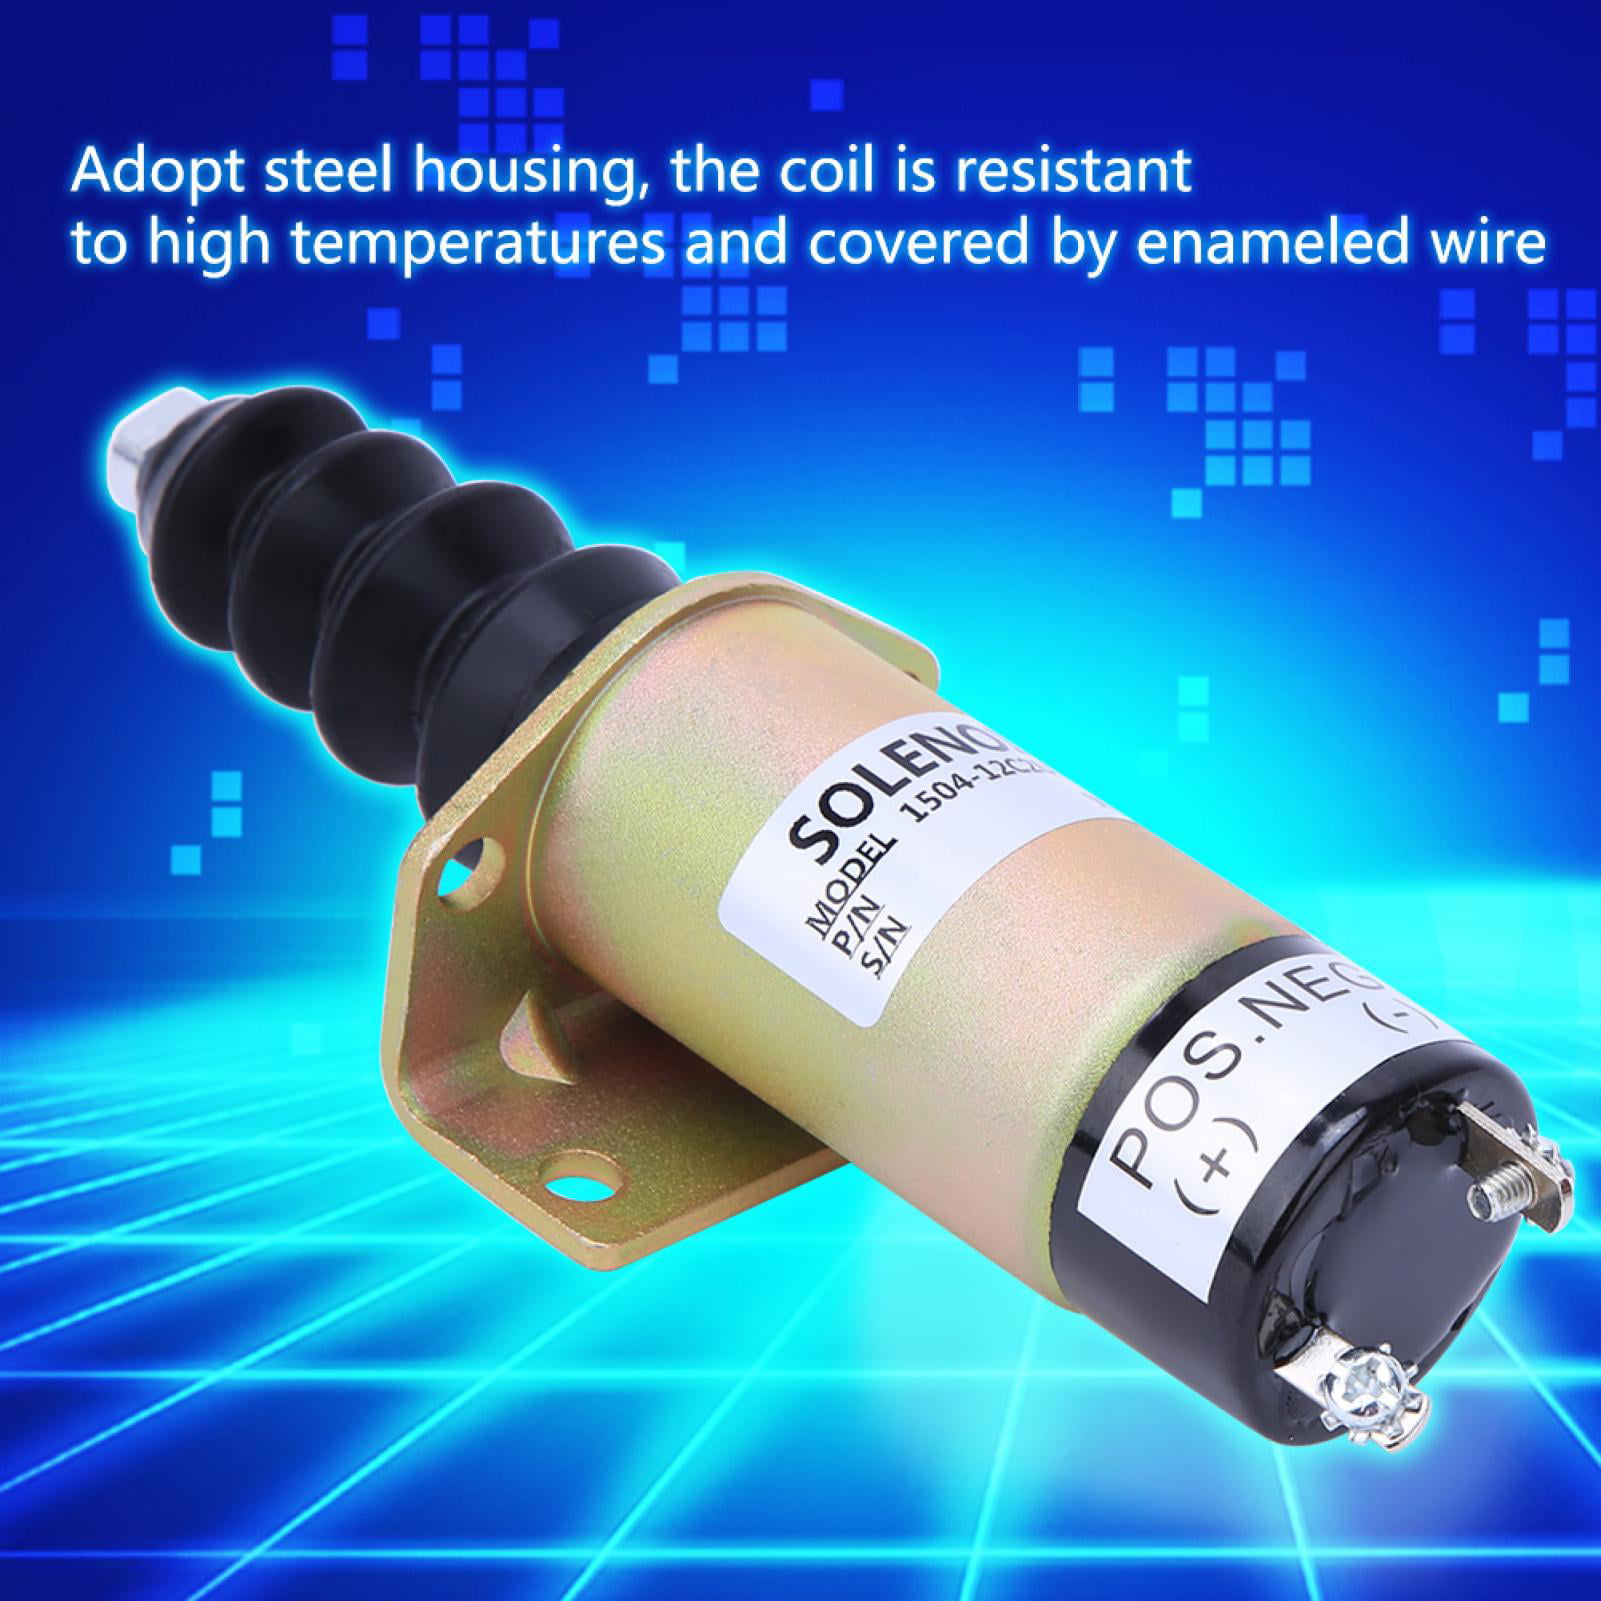 Steel housing 12V Shut-Off Solenoid Valve high Temperature Resistant enameled Wire 1504-12C2U1B1S1 Steel housing Motor Replacement kit Coil 